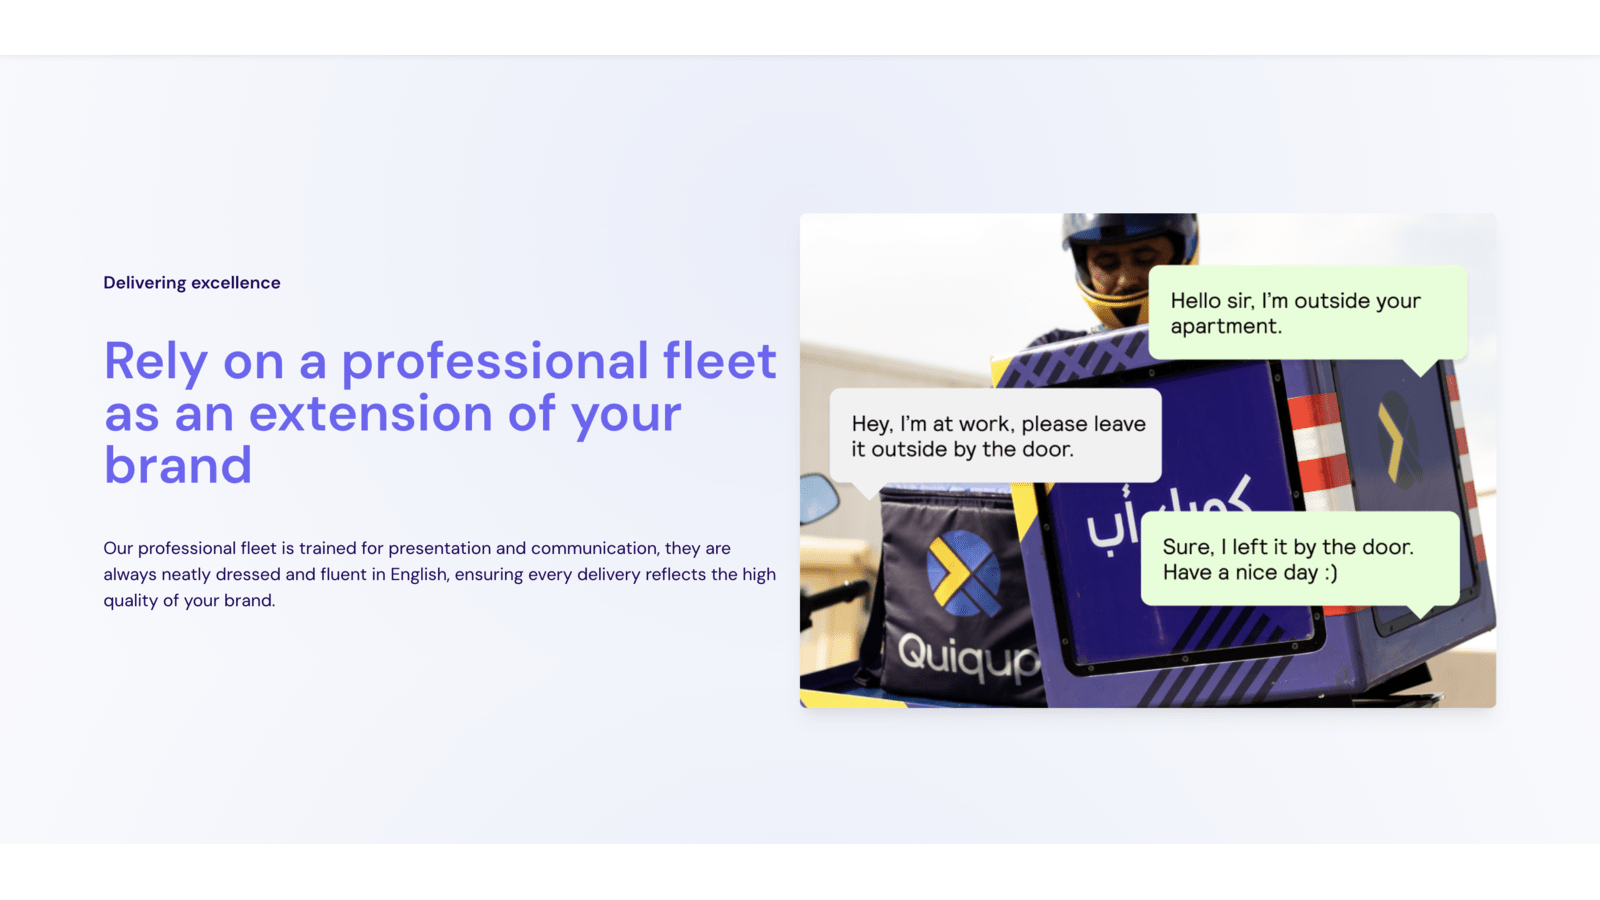 Rely on a professional fleet as an extension of your brand